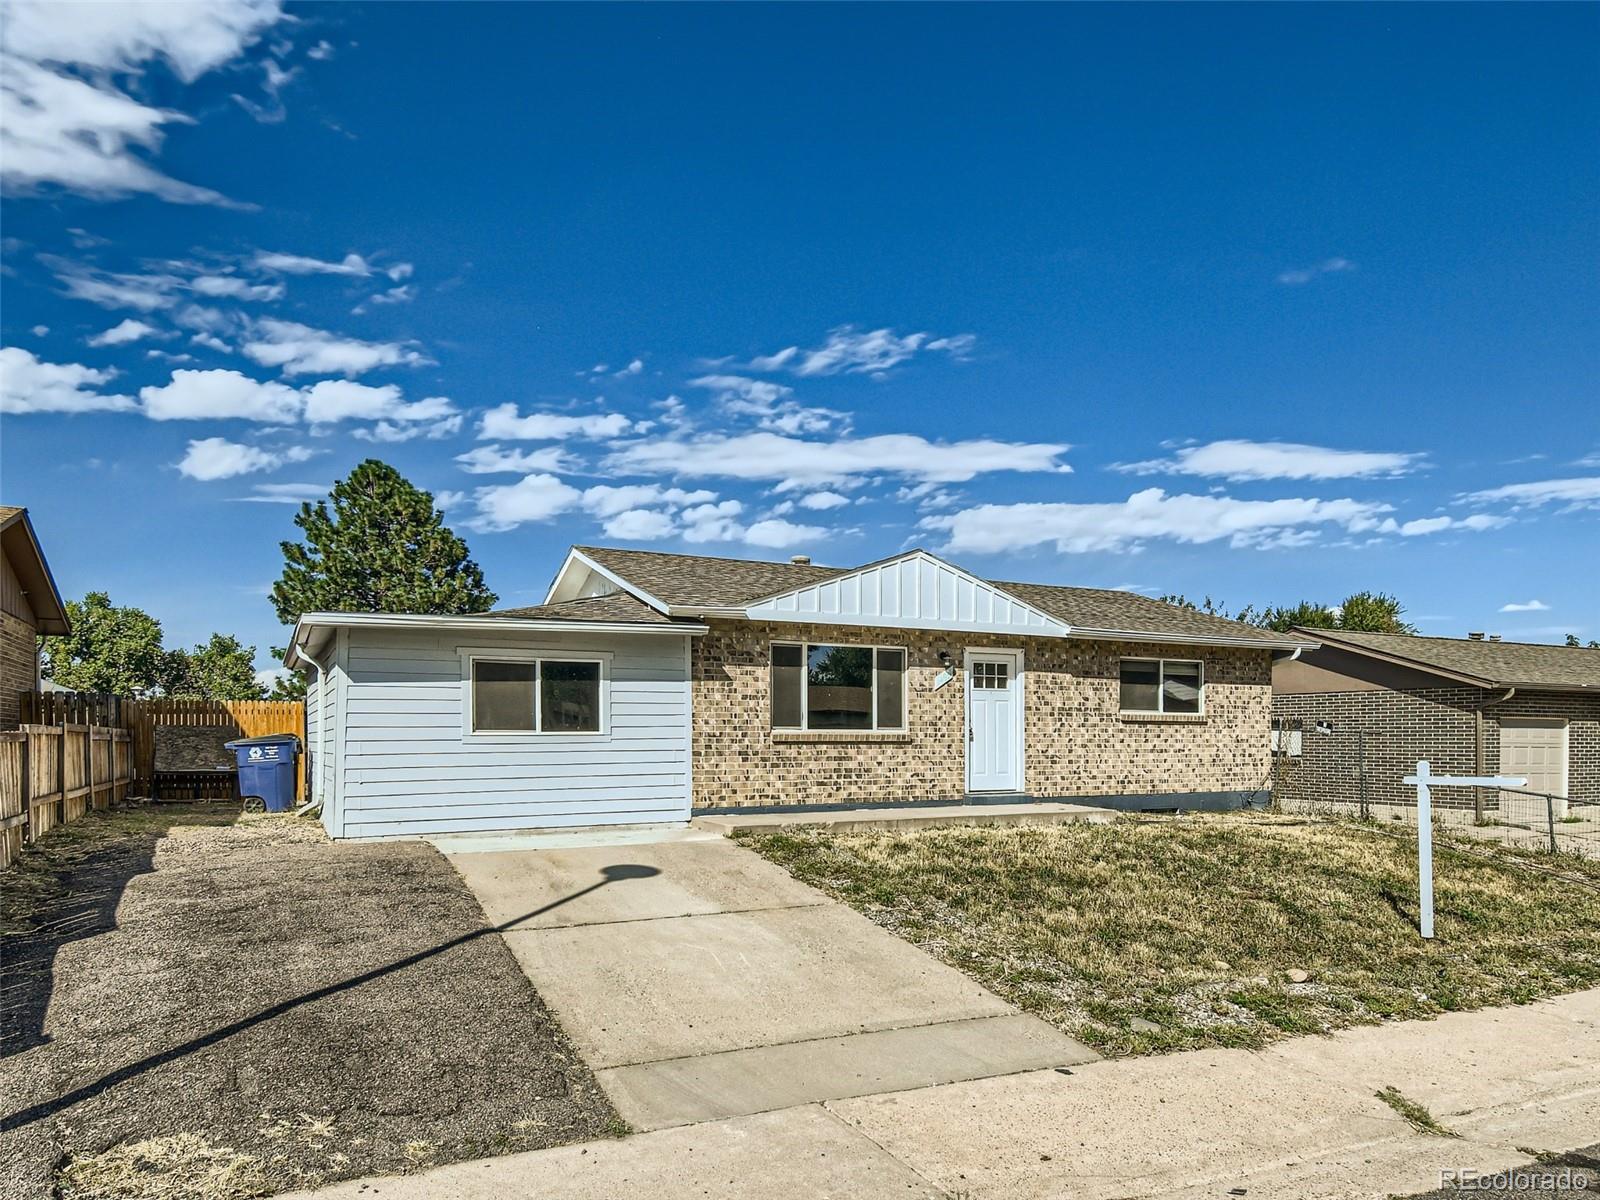 14951  pensacola place, denver sold home. Closed on 2024-04-19 for $469,000.